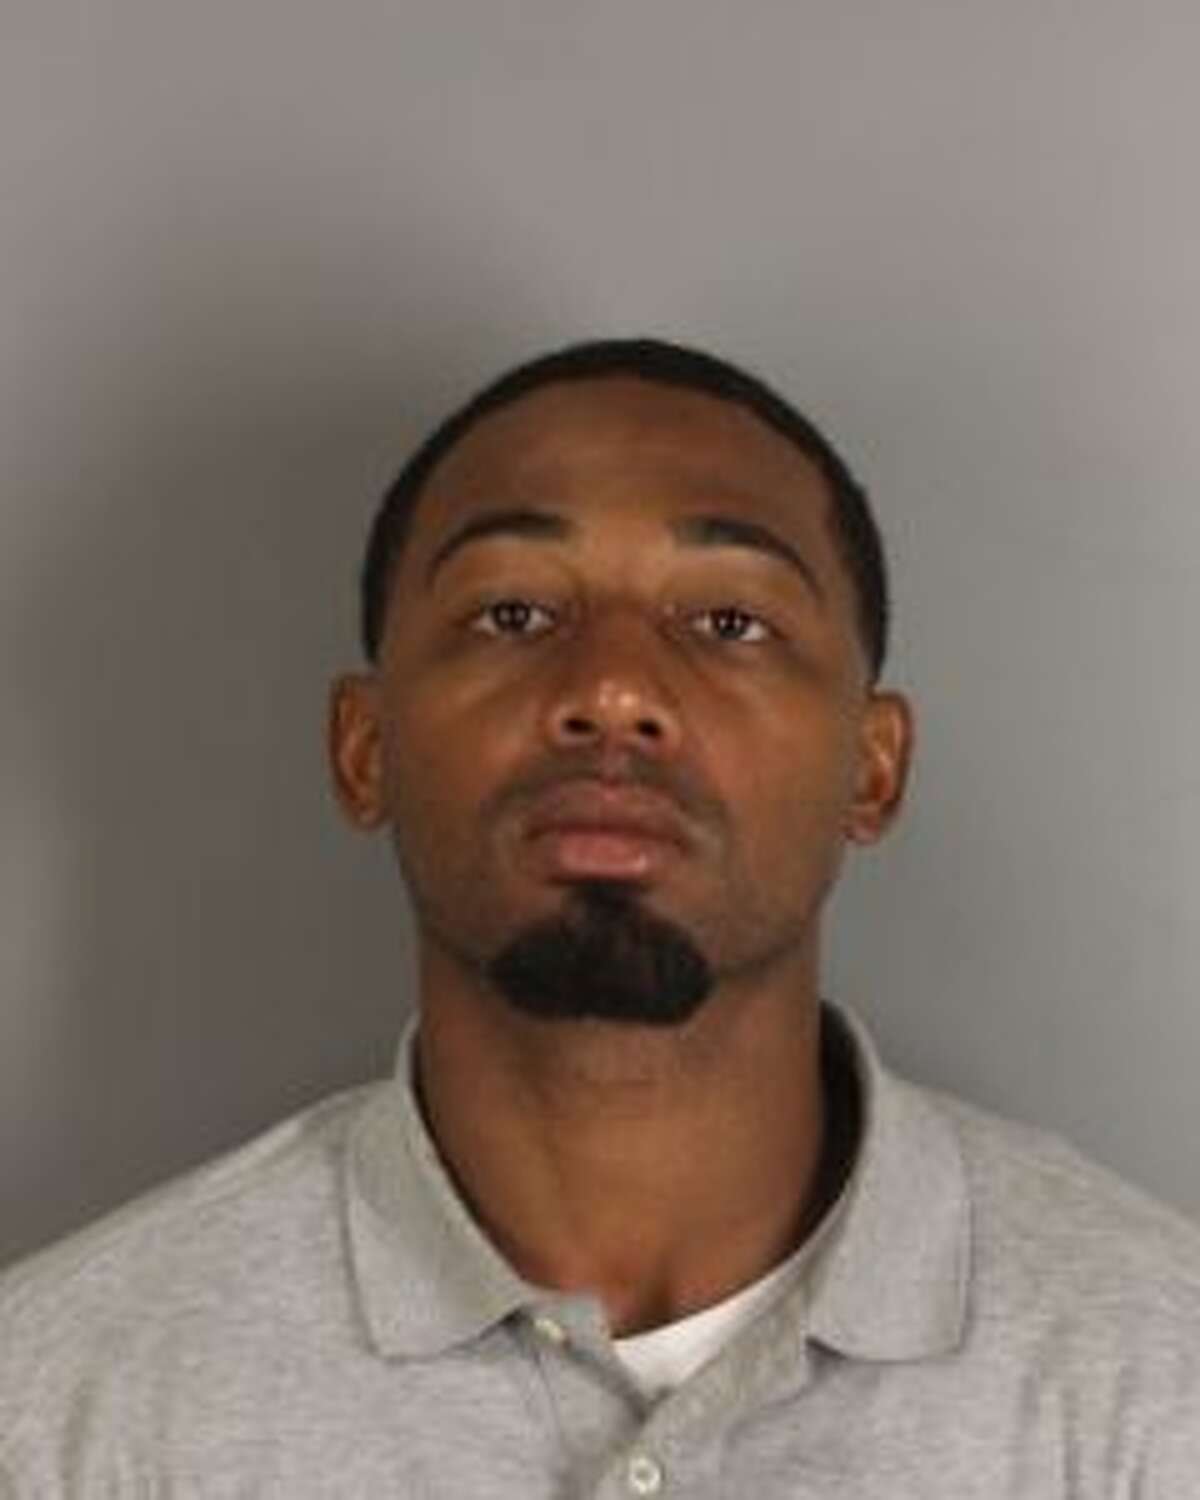 Jacoby Dejei Griffin, 25, was arrested on Wednesday for evading and possession of a controlled substance.